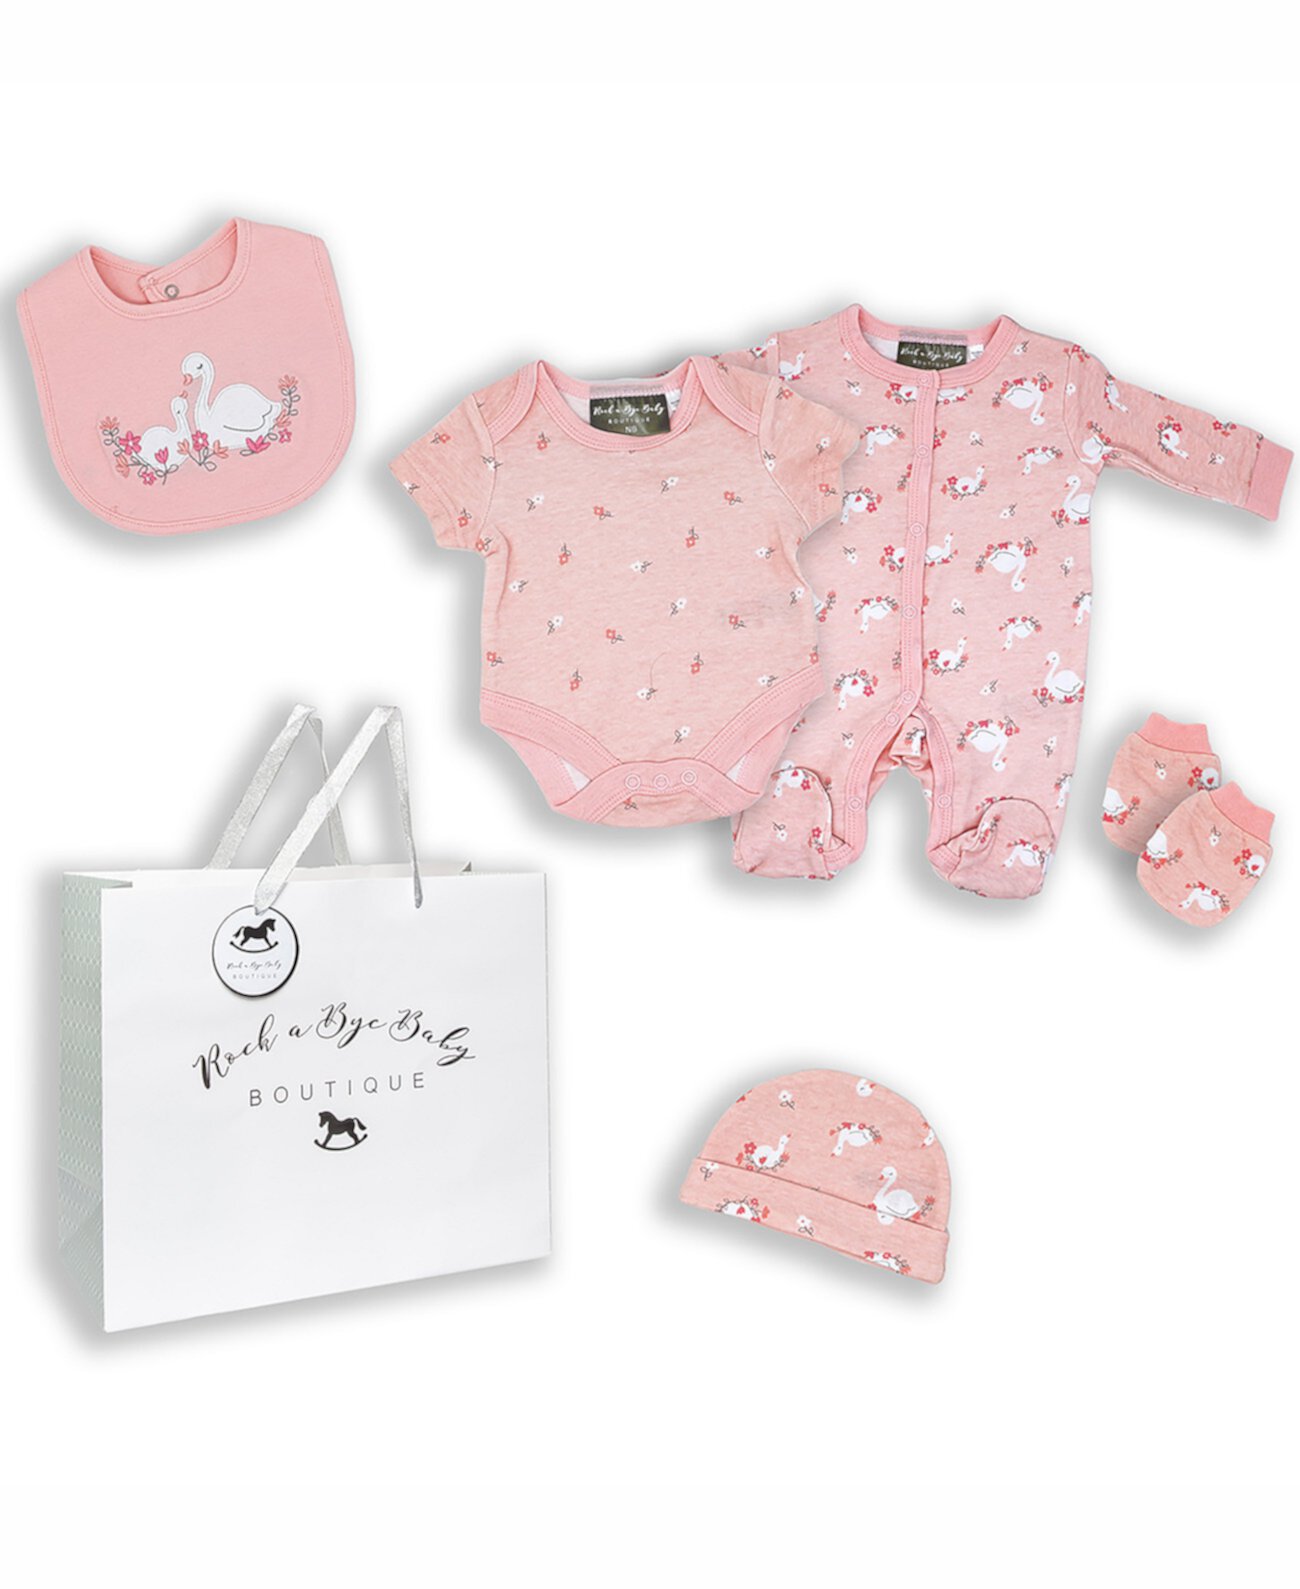 Baby Girls Lovely Swan Layette Gift в сетчатом мешке, набор из 5 предметов Rock-A-Bye Baby Boutique